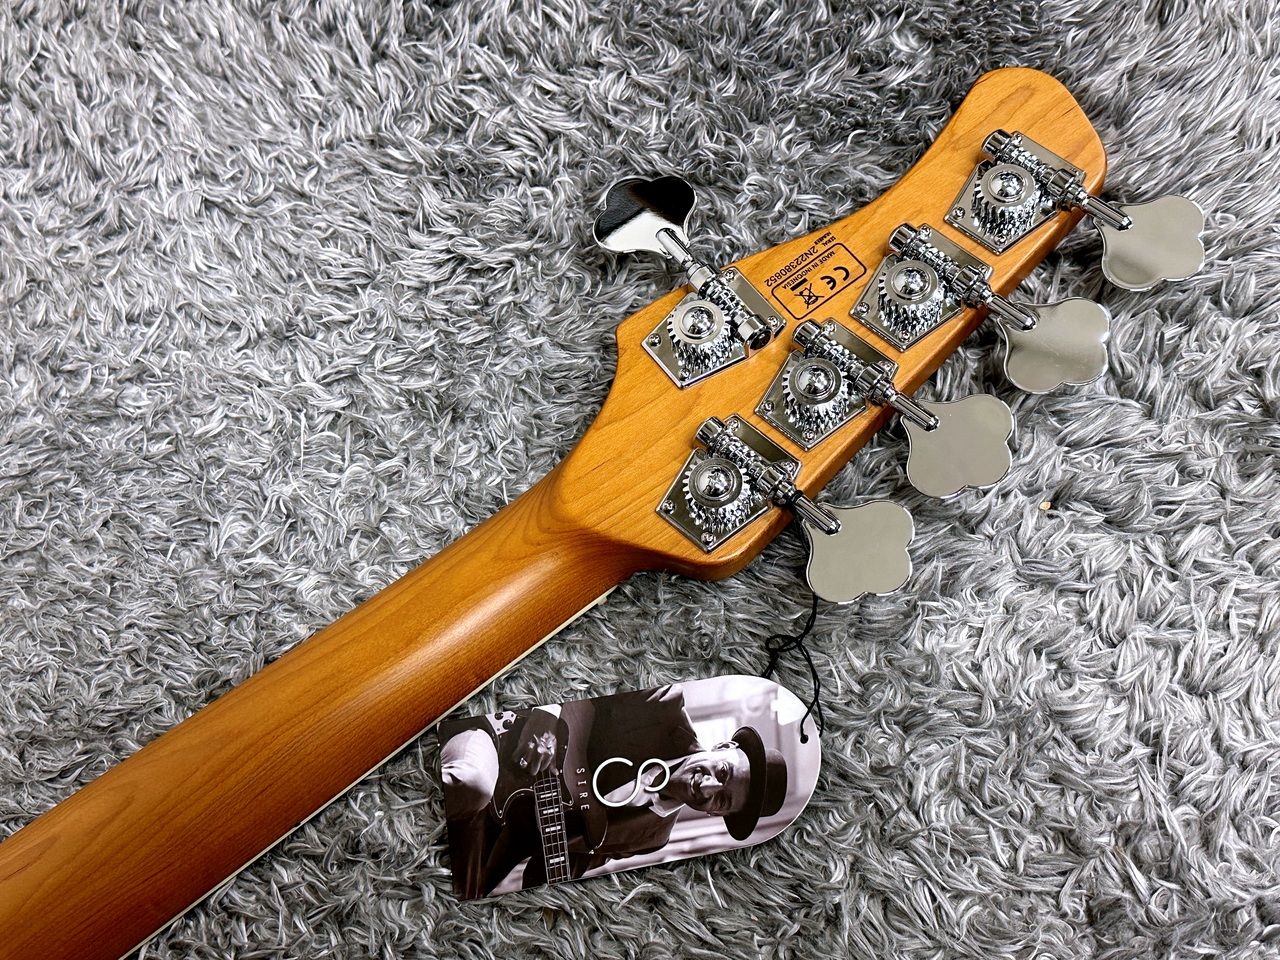 Sire V8 5st NT with Marcus Miller【5弦ベース】（新品/送料無料 